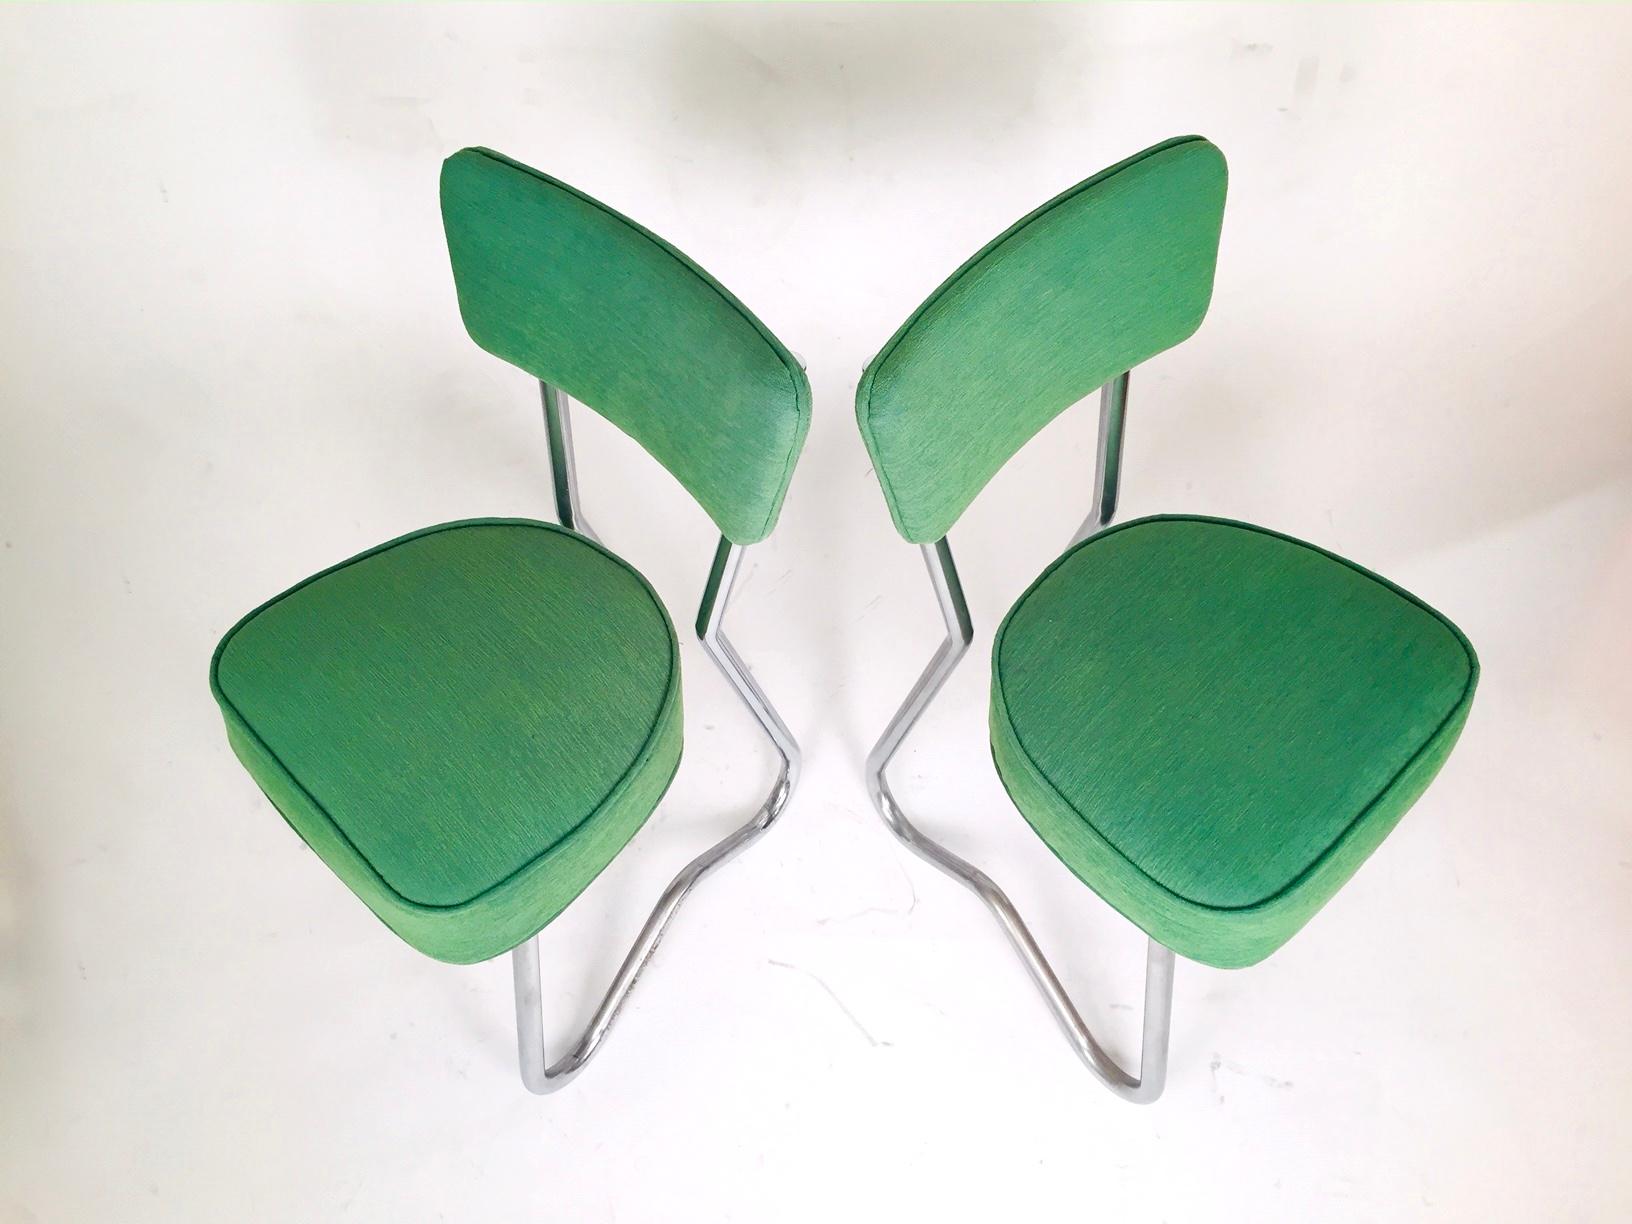 Stainless Steel Pair of French Rationalist Chairs, Model 